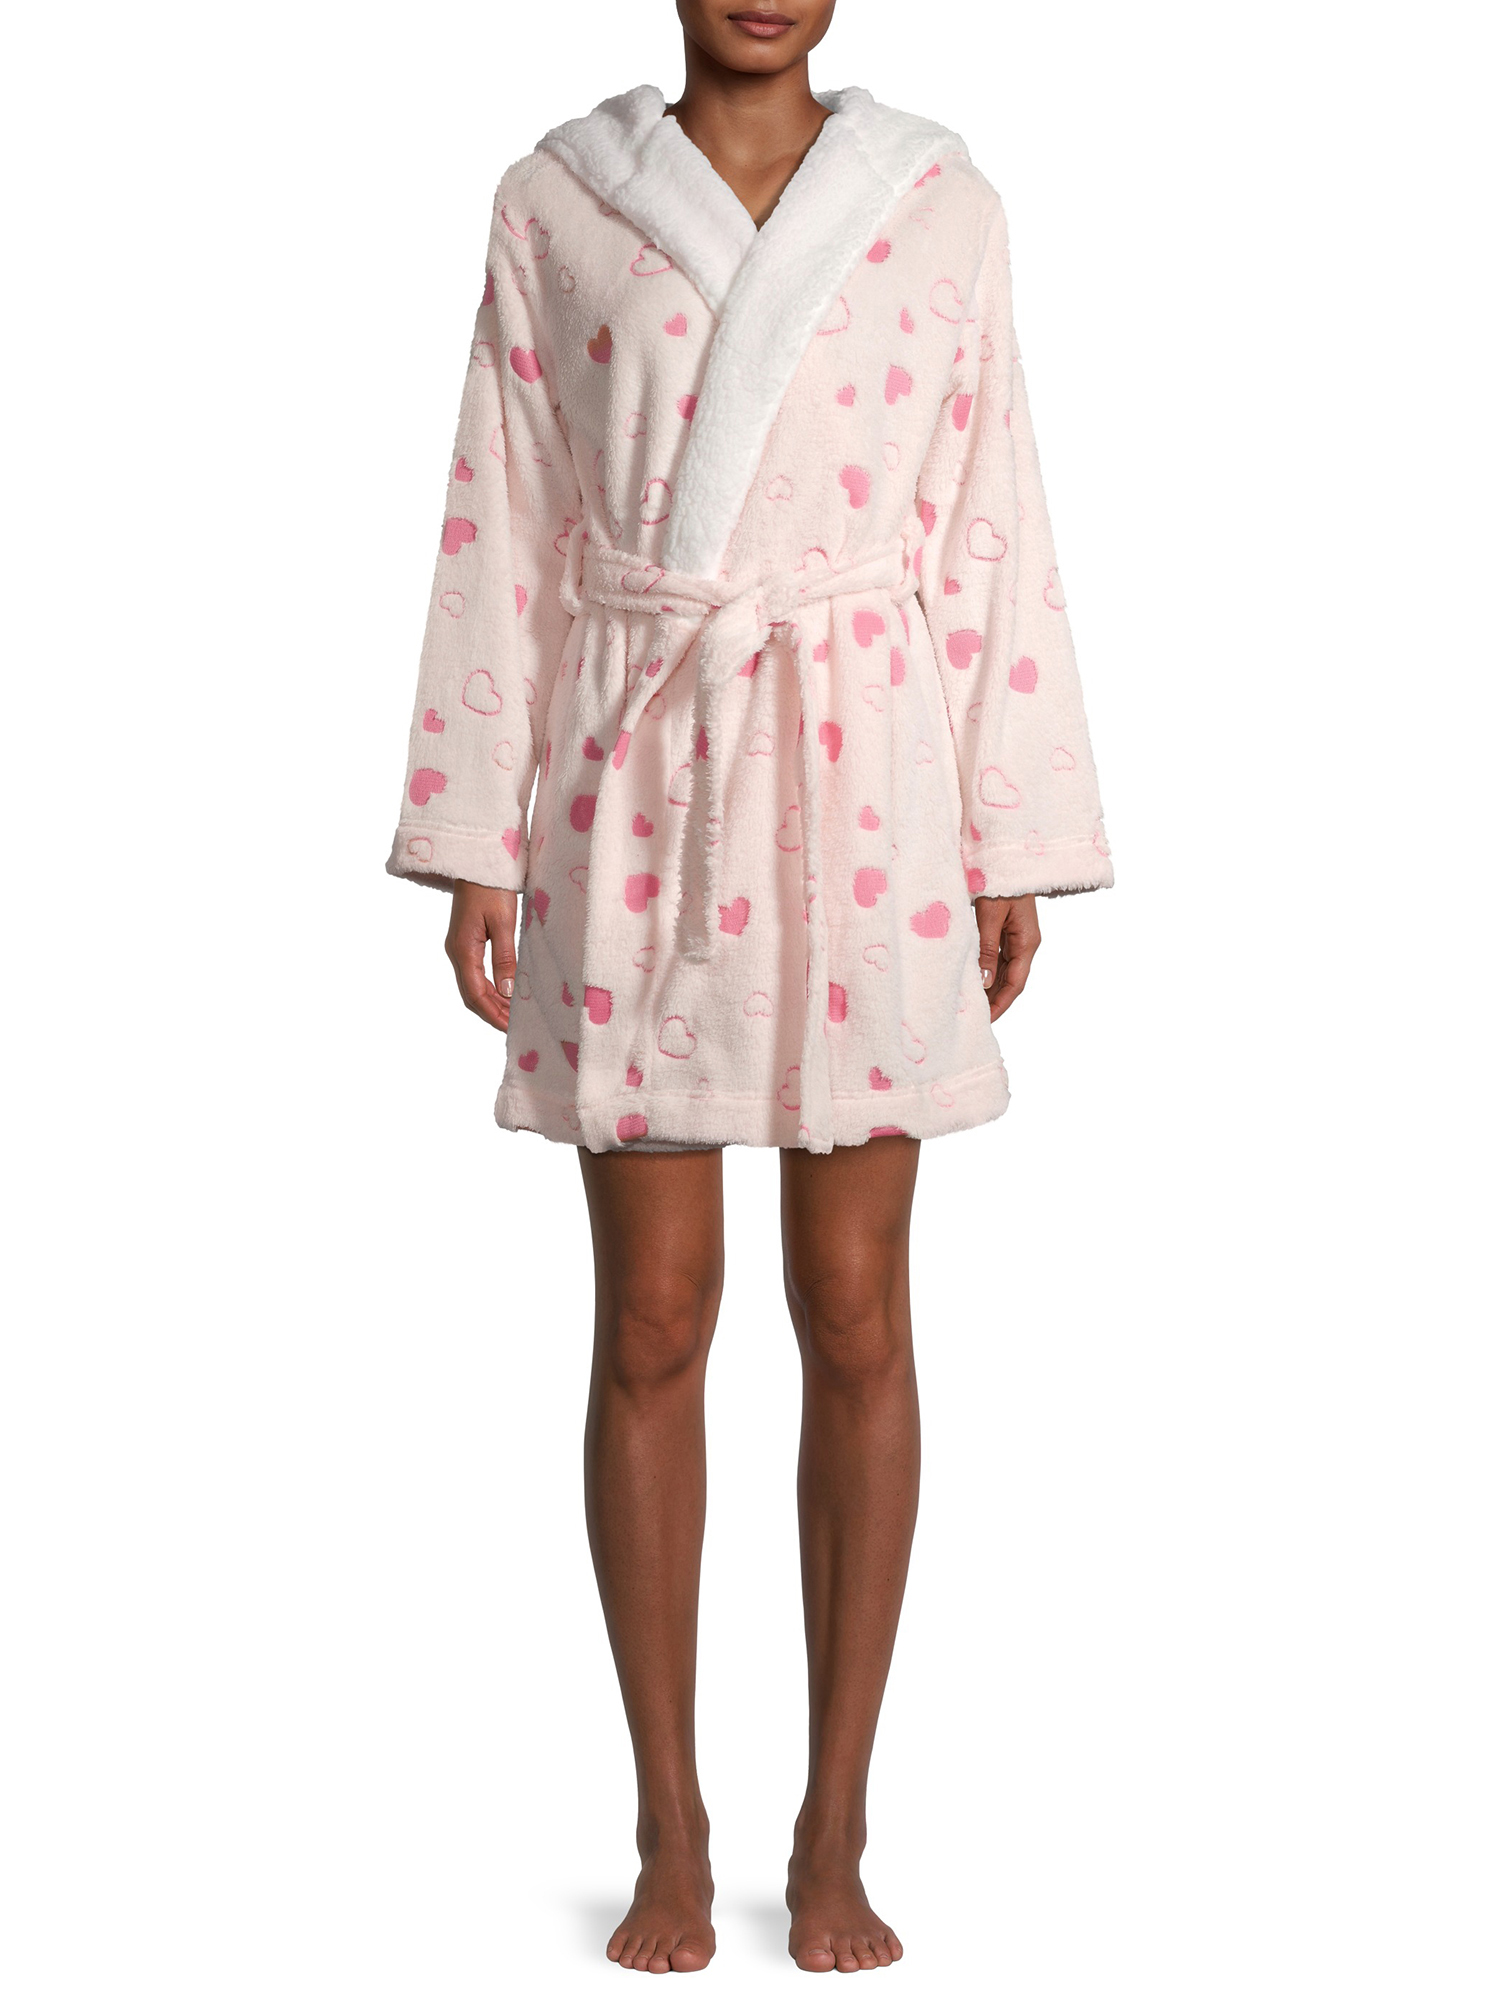 Sleep & Co Women's and Women's Plus Plush Robe with Tie Belt and Faux Sherpa Lining - image 5 of 10